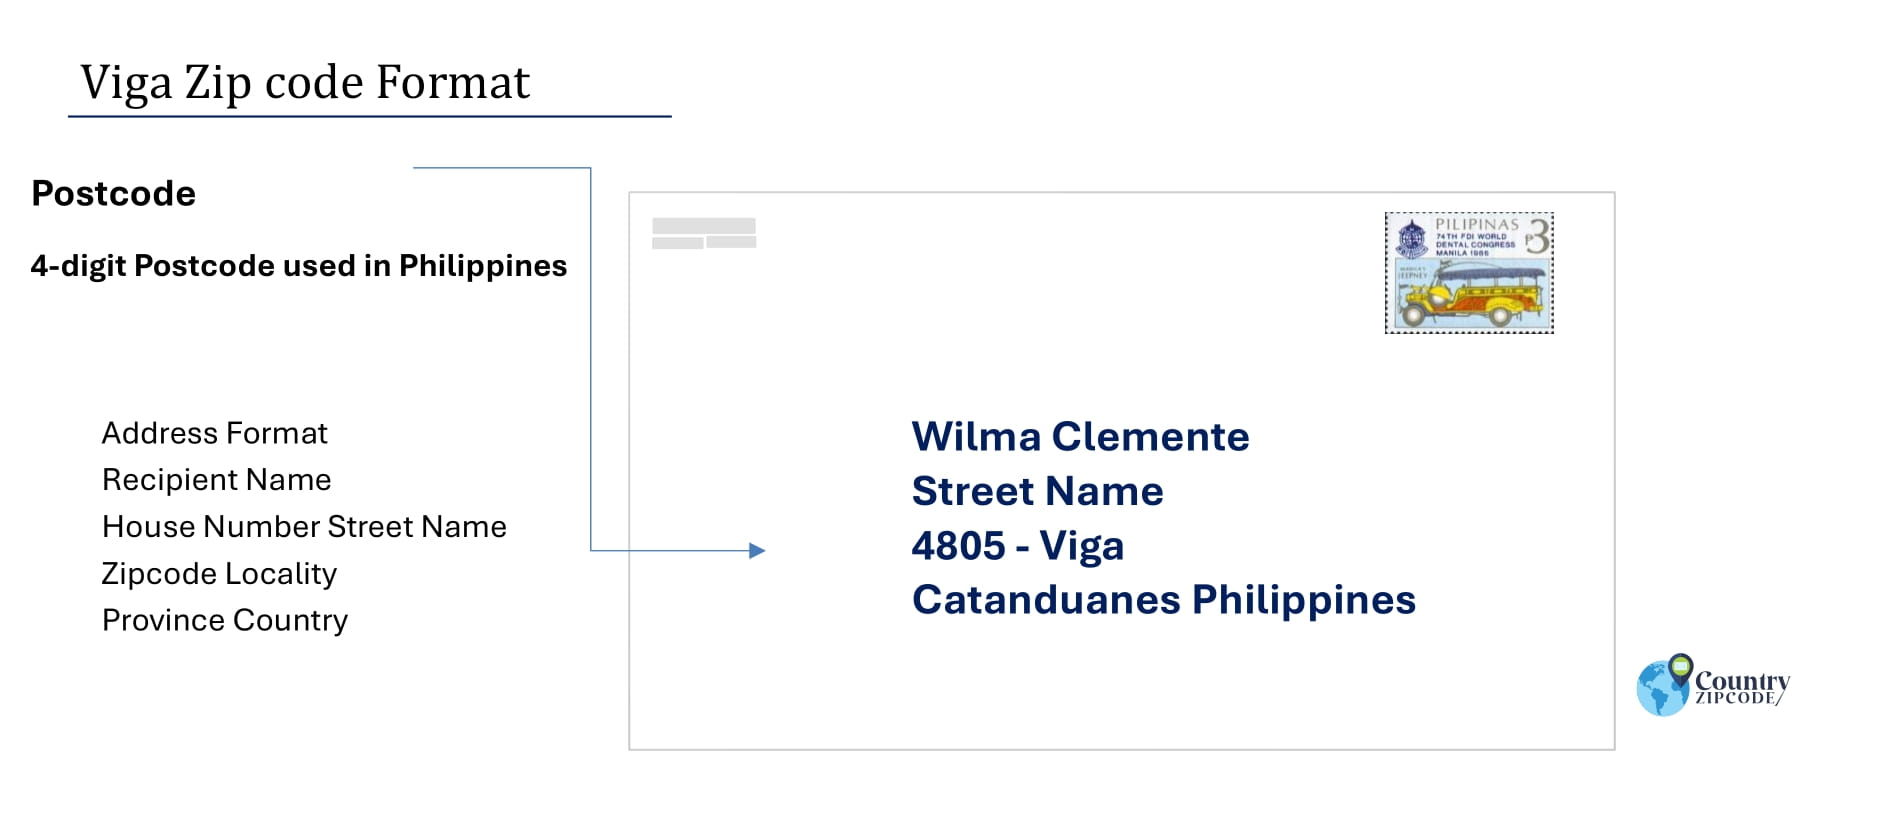 example of Viga Philippines zip code and address format